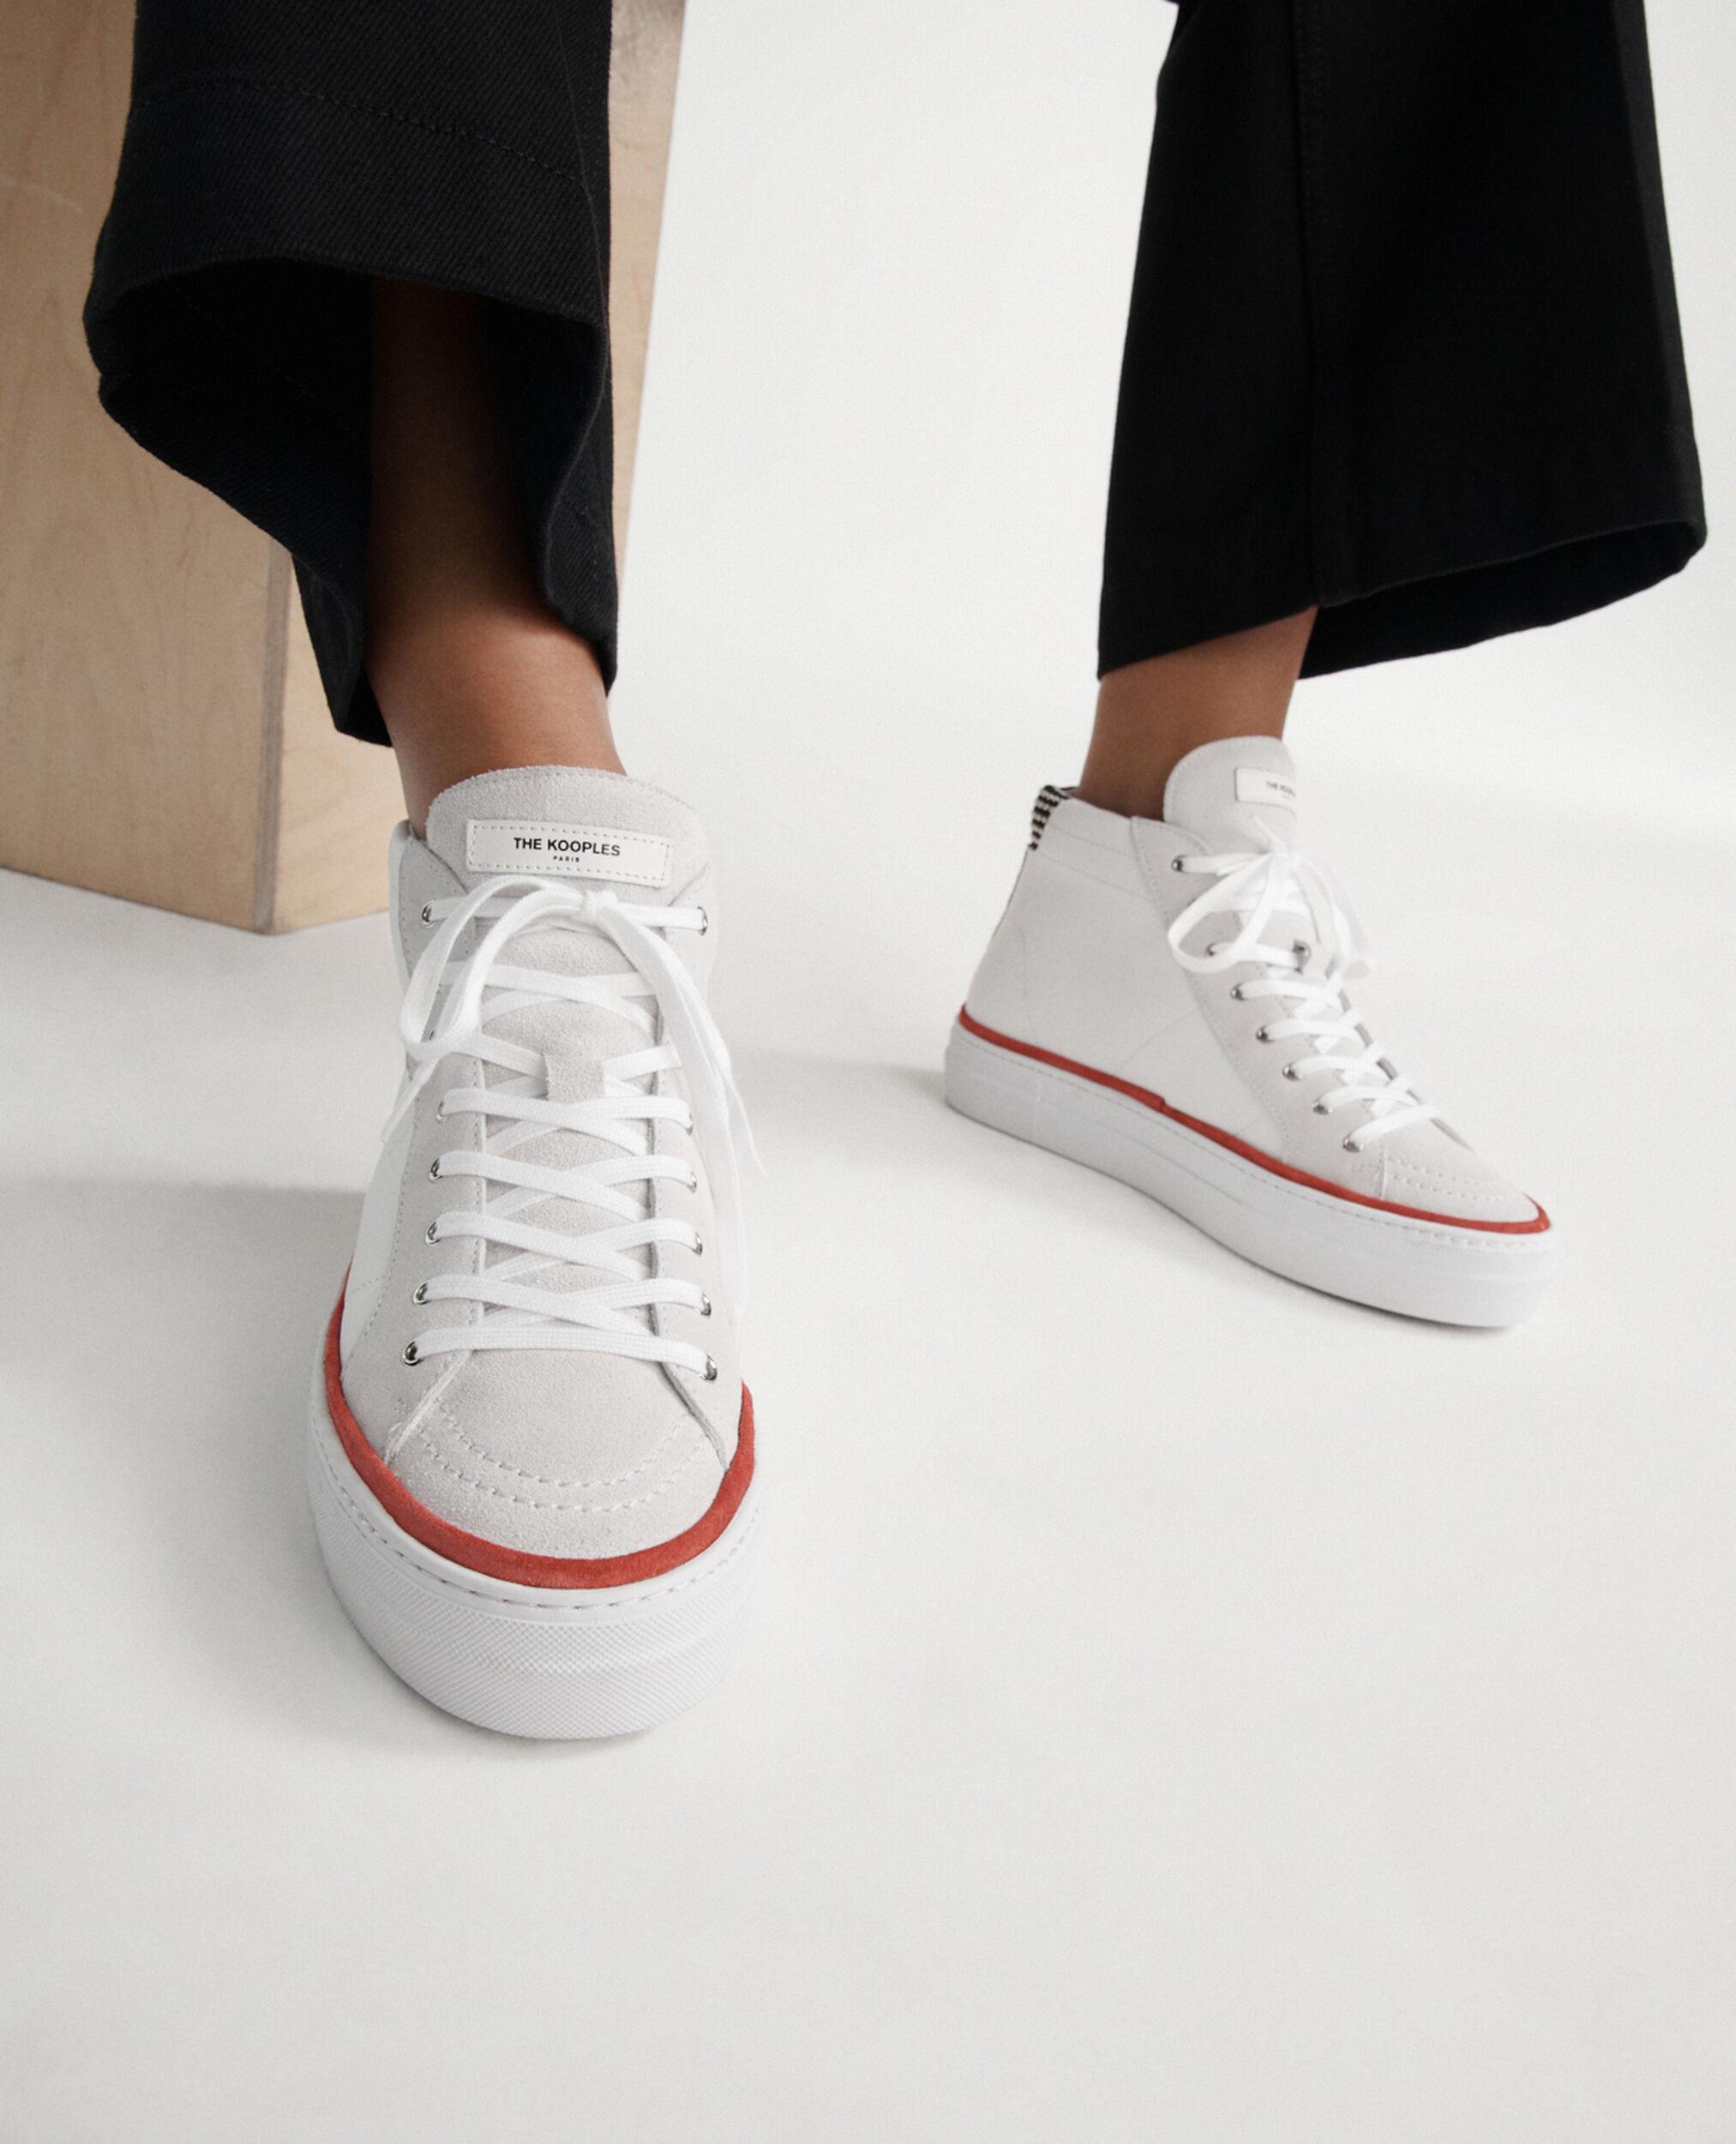 White leather sneakers with colored details, WHITE / GREY / RED, hi-res image number null